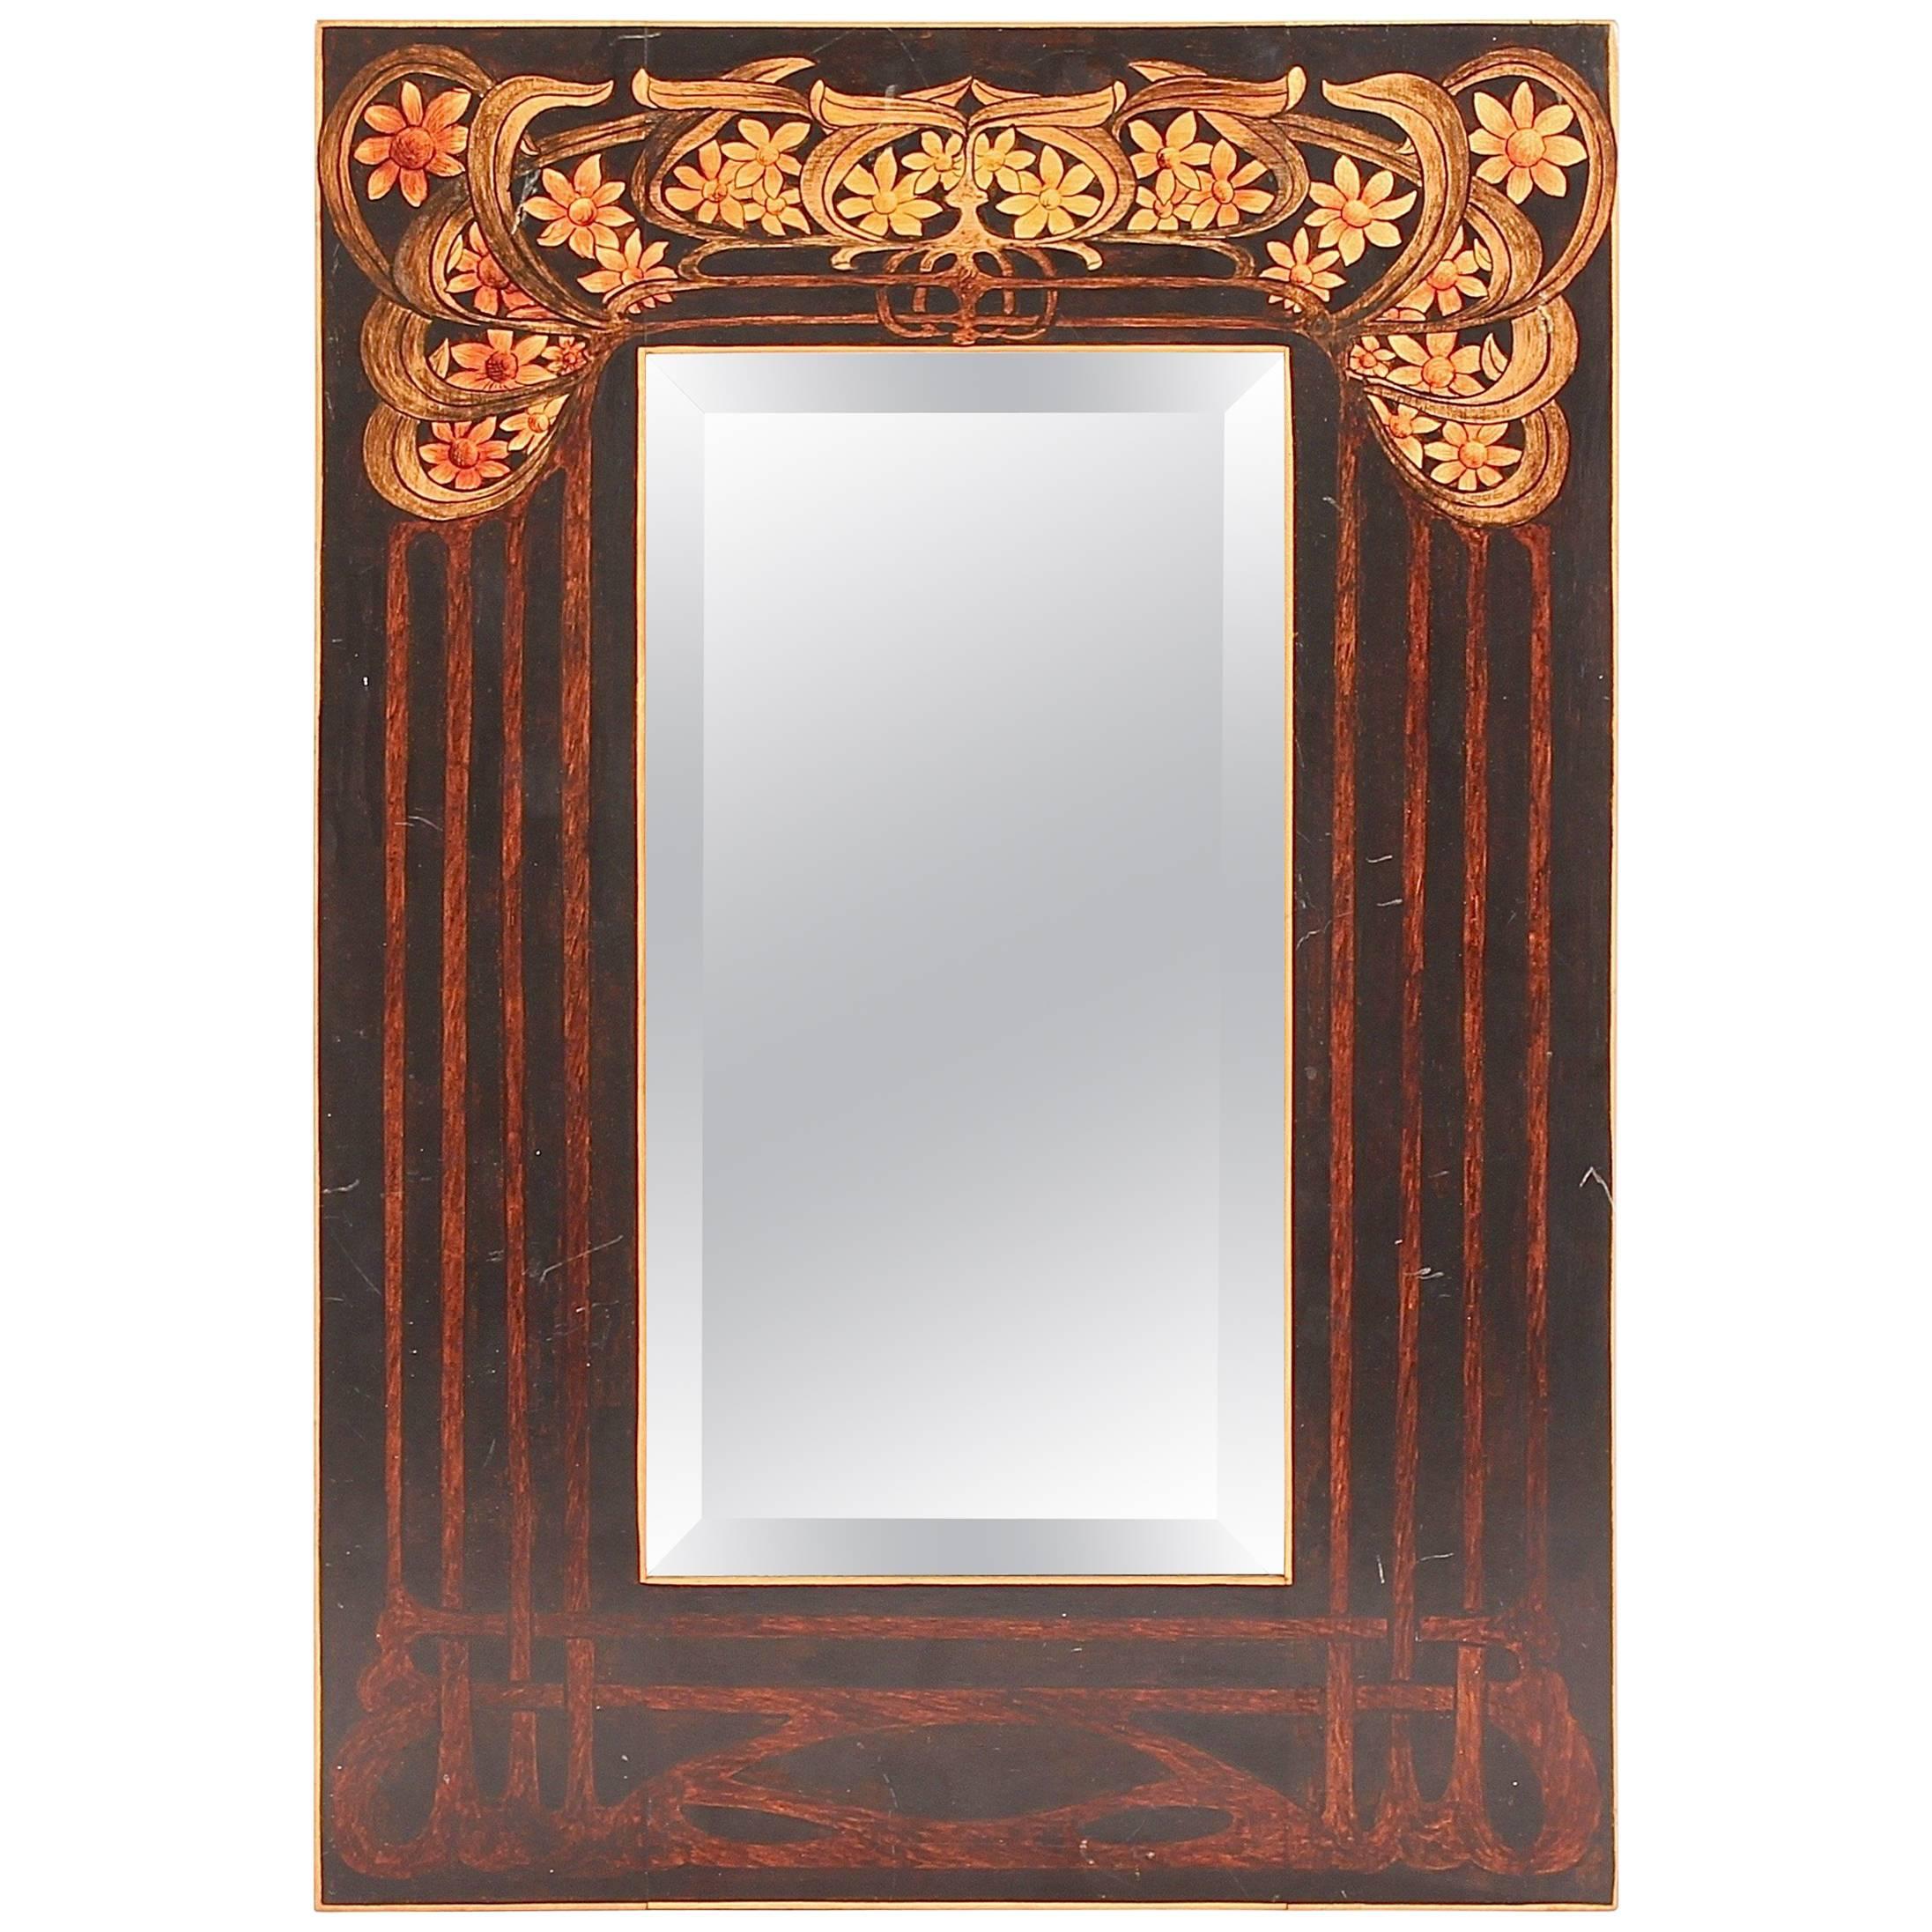 Small Art Nourveau Rectangular Mirror in the Manner of Shapland & Petter